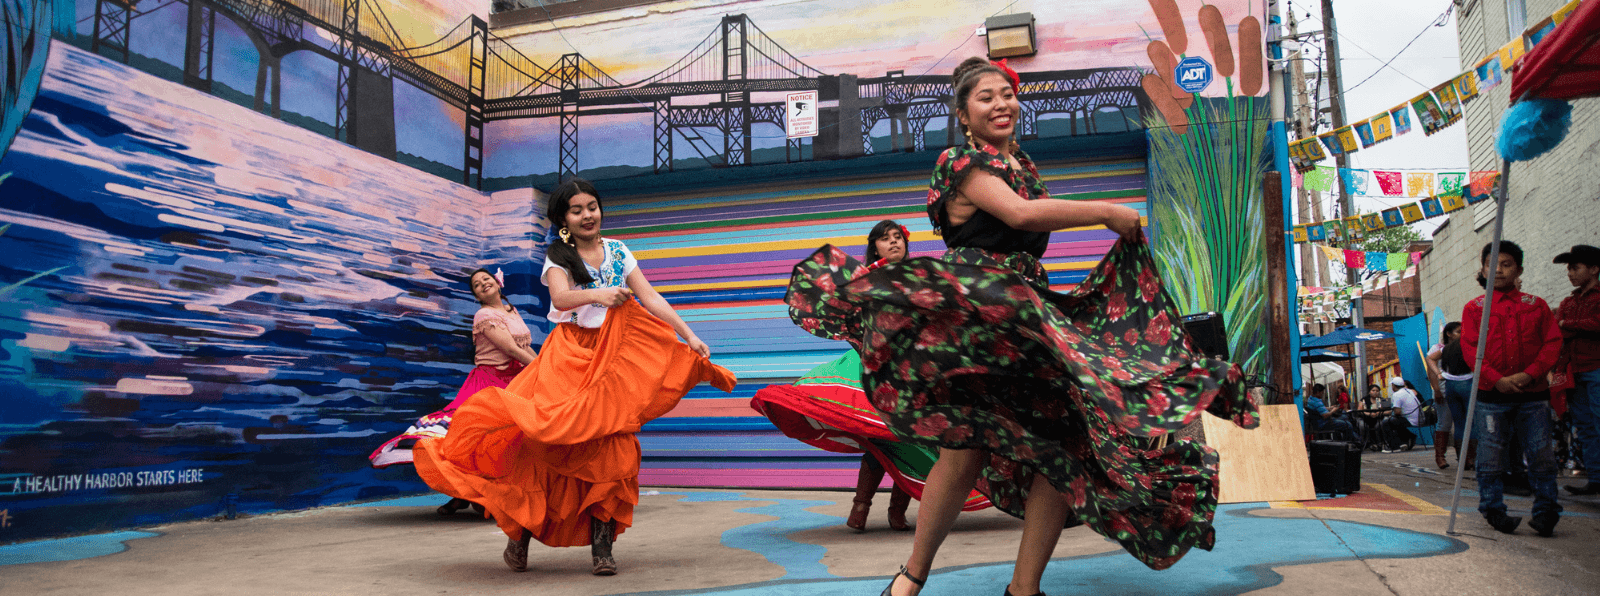 Women dancing outside in brightly colored dresses